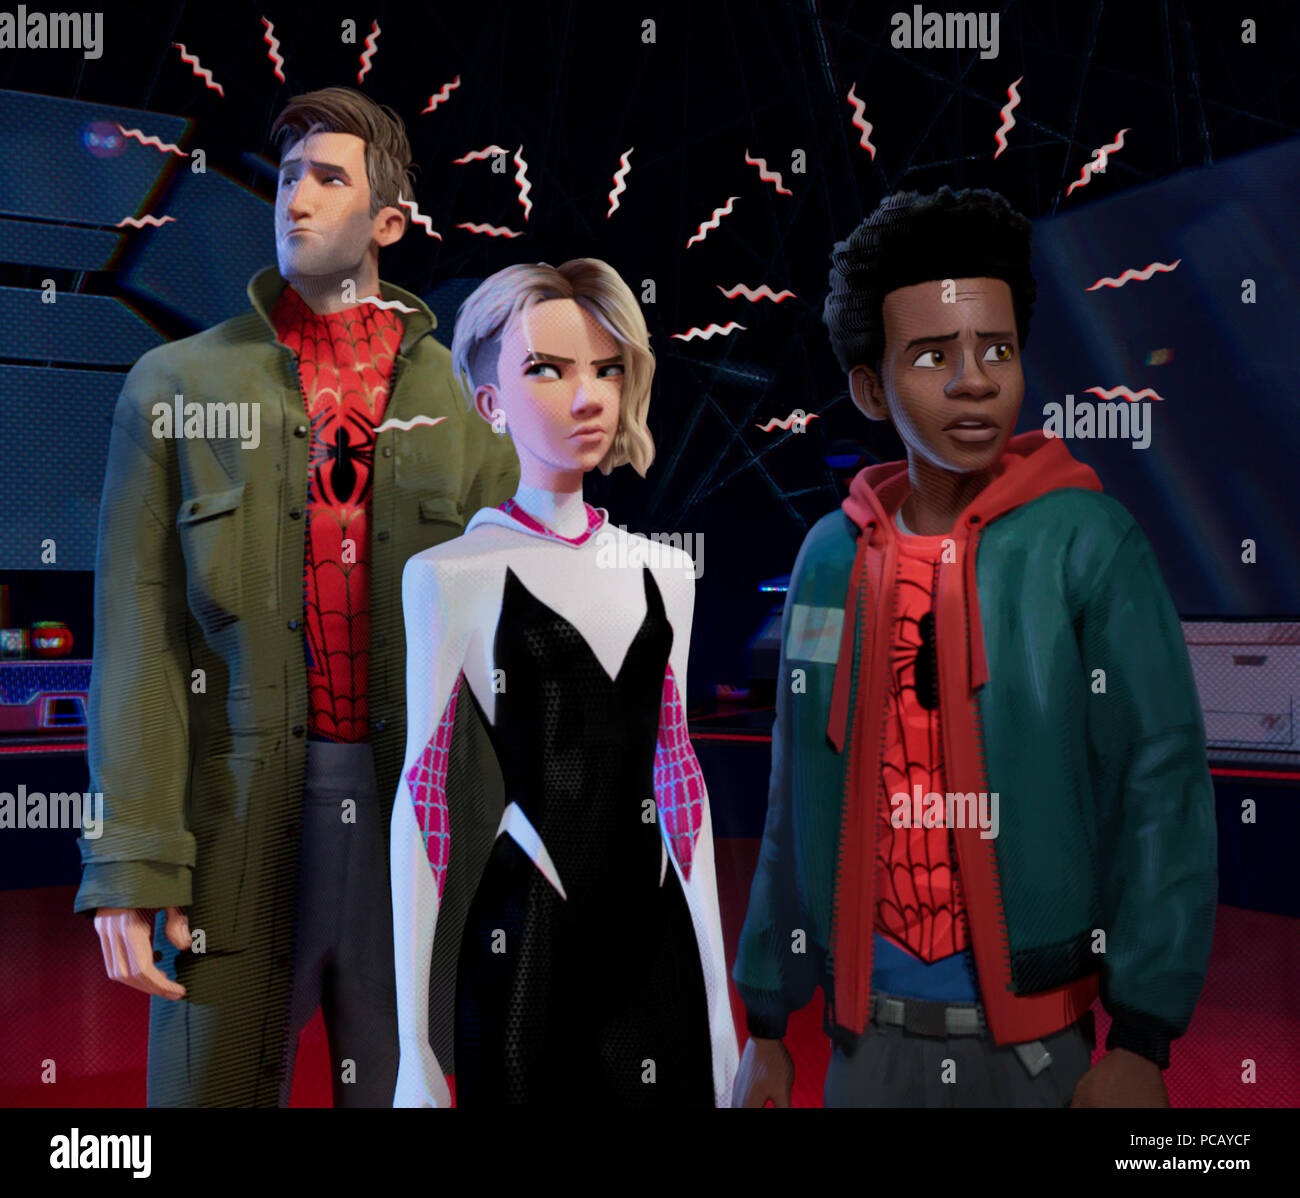 RELEASE DATE: December 14, 2018 TITLE: Spider-Man: Into The Spider-Verse STUDIO: Columbia Pictures DIRECTOR: Bob Persichetti, Peter Ramsey PLOT: Spider-Man crosses parallel dimensions and teams up with the Spider-Men of those dimensions to stop a threat to all reality. STARRING: Peter Parker (Jake Johnson), Gwen Stacy (Hailee Steinfeld) and Miles Morales (Shameik Moore). (Credit Image: © Columbia Pictures/Entertainment Pictures) Stock Photo